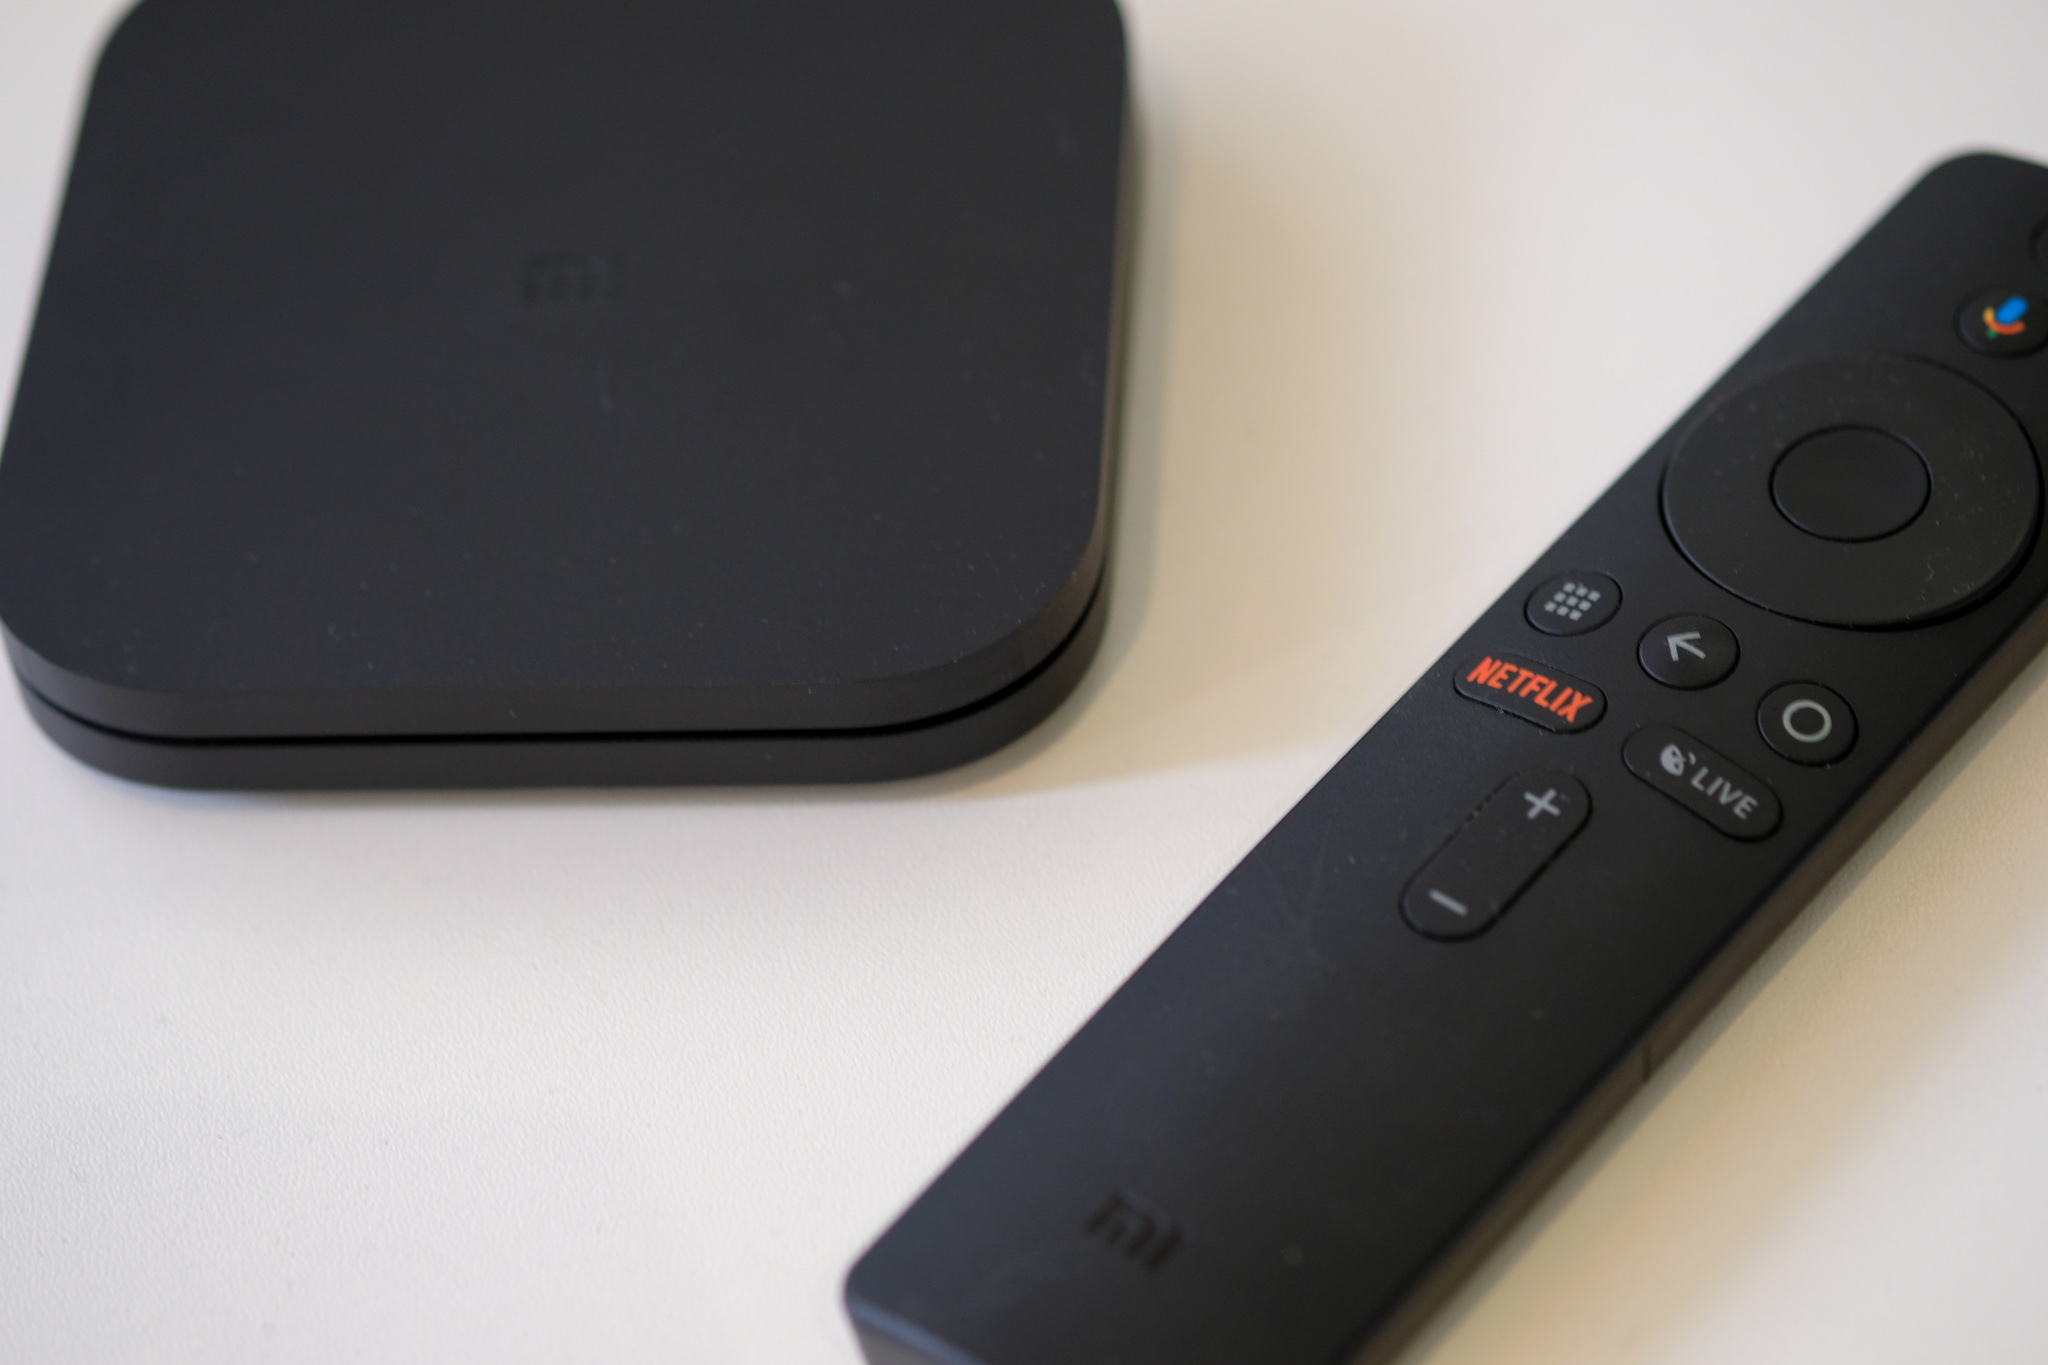 Xiaomi Mi Box S Review: The best Android TV for most users